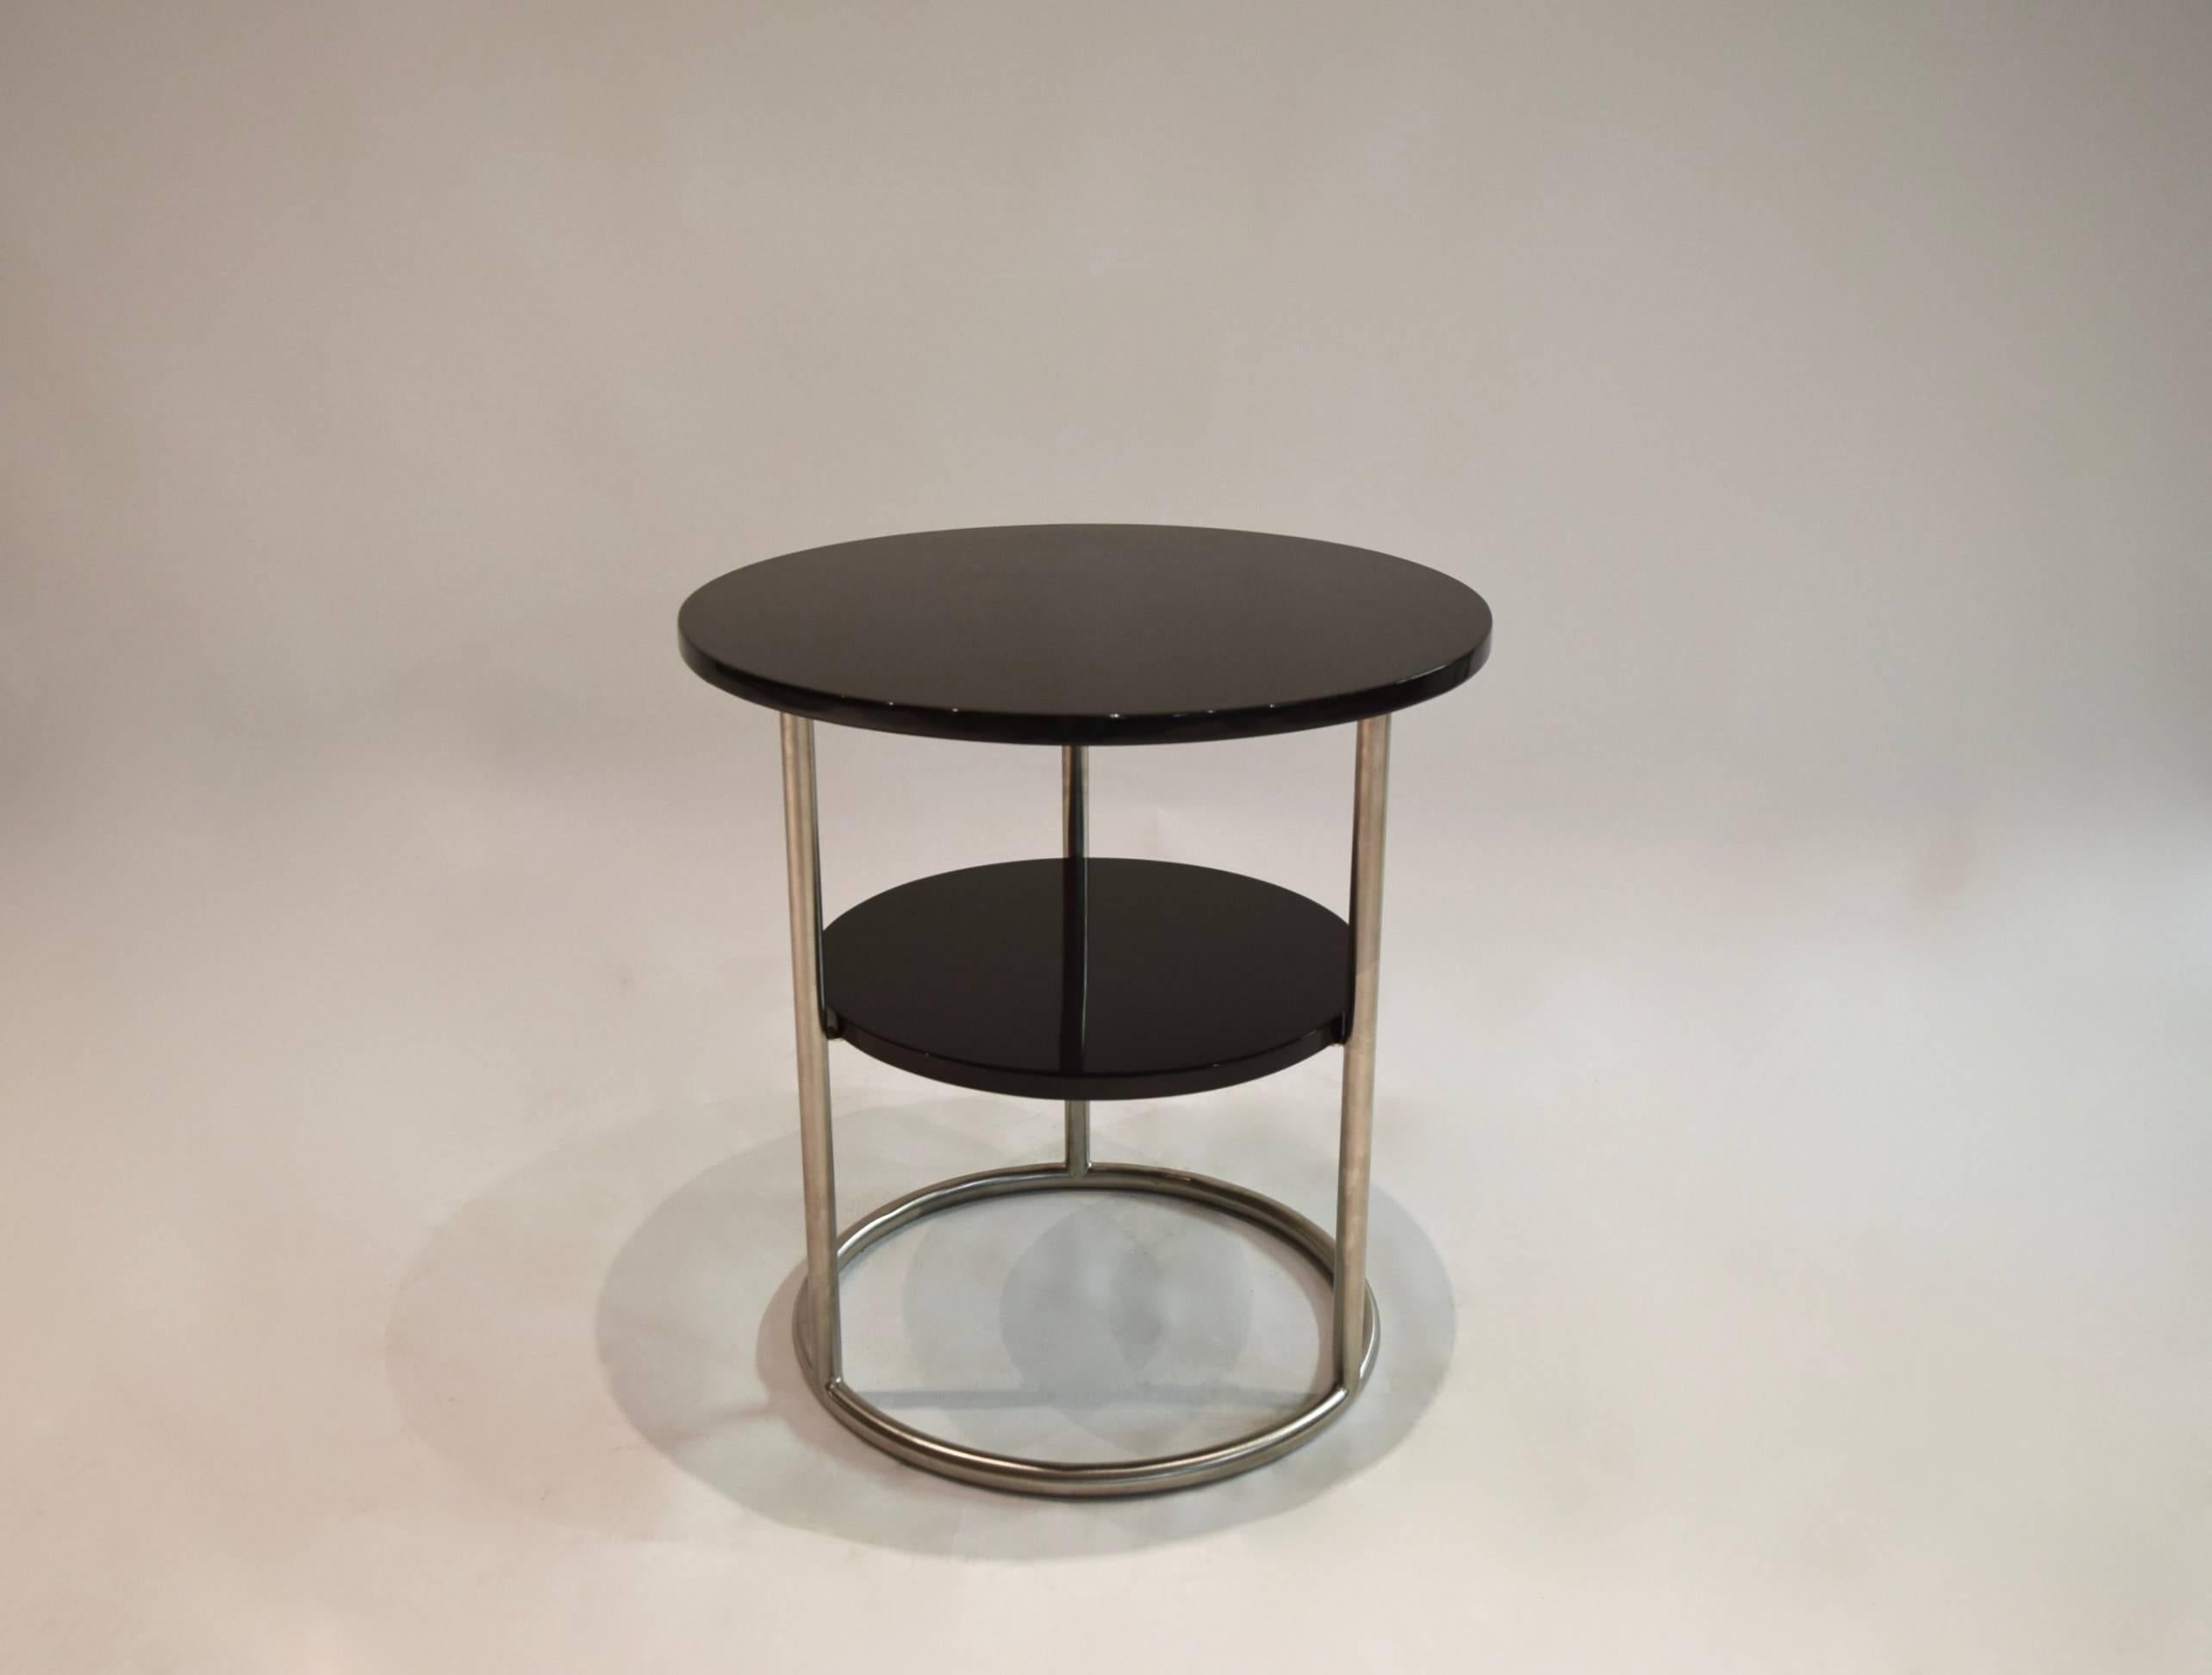 Pair of round side tables with a brushed tubular steel frame that supports a 16